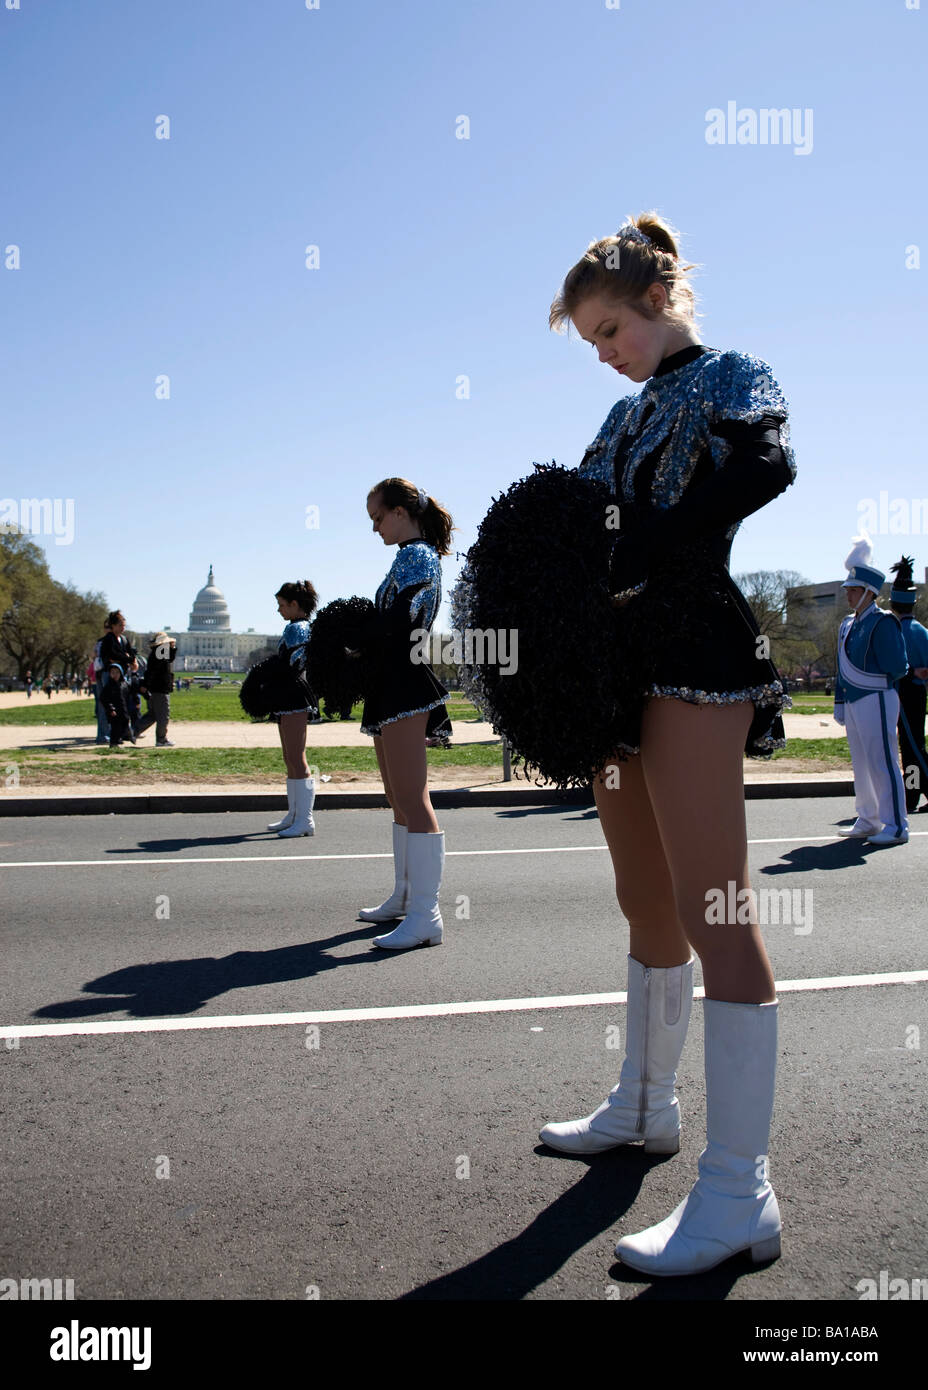 Cheerleaders lined up for march Stock Photo